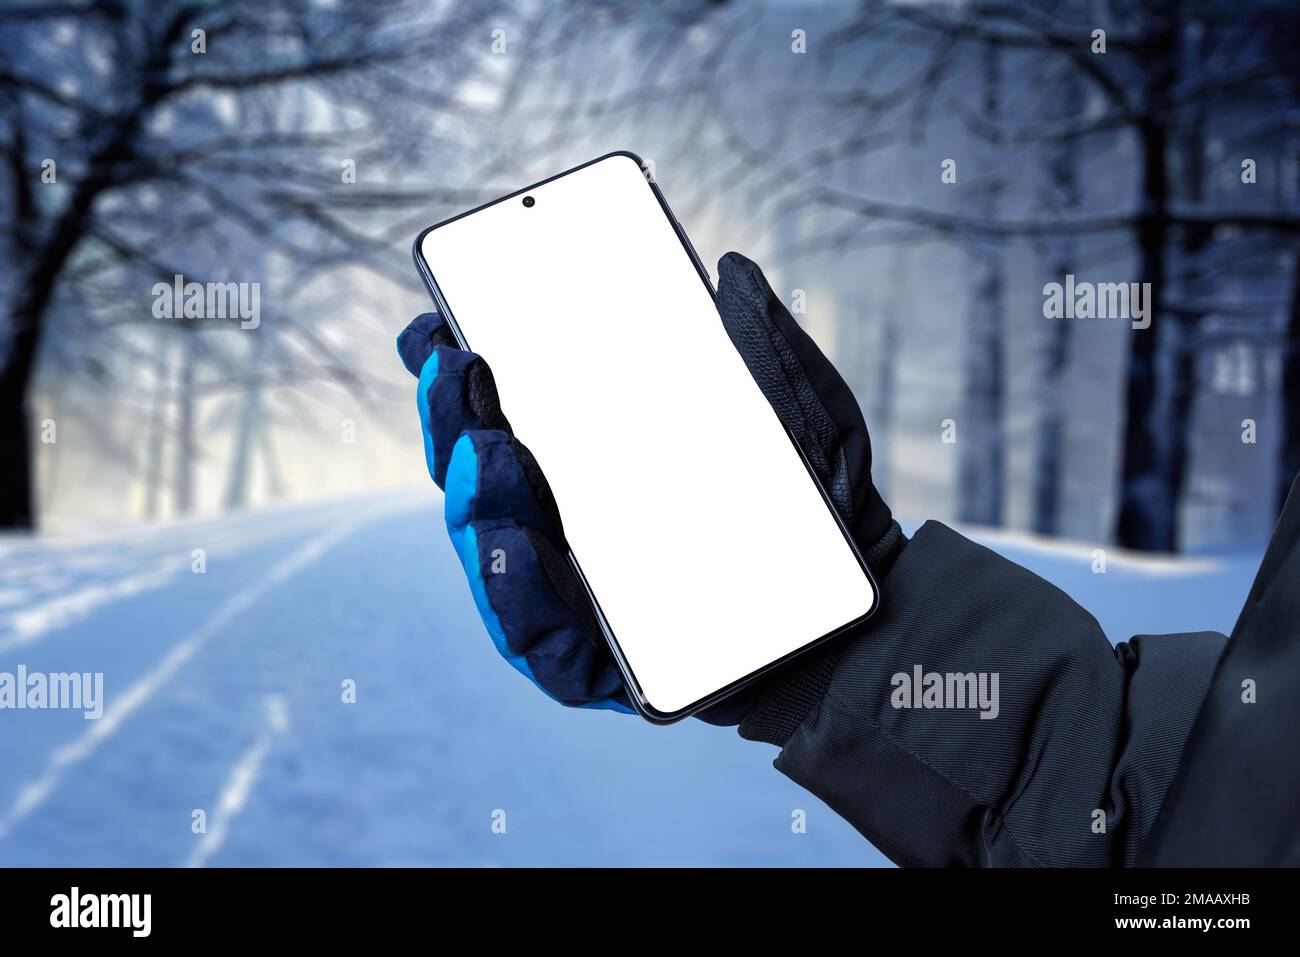 Mobile phone in hand with winter glove. Trees covered with snow in background. Isolated display for app promotion Stock Photo